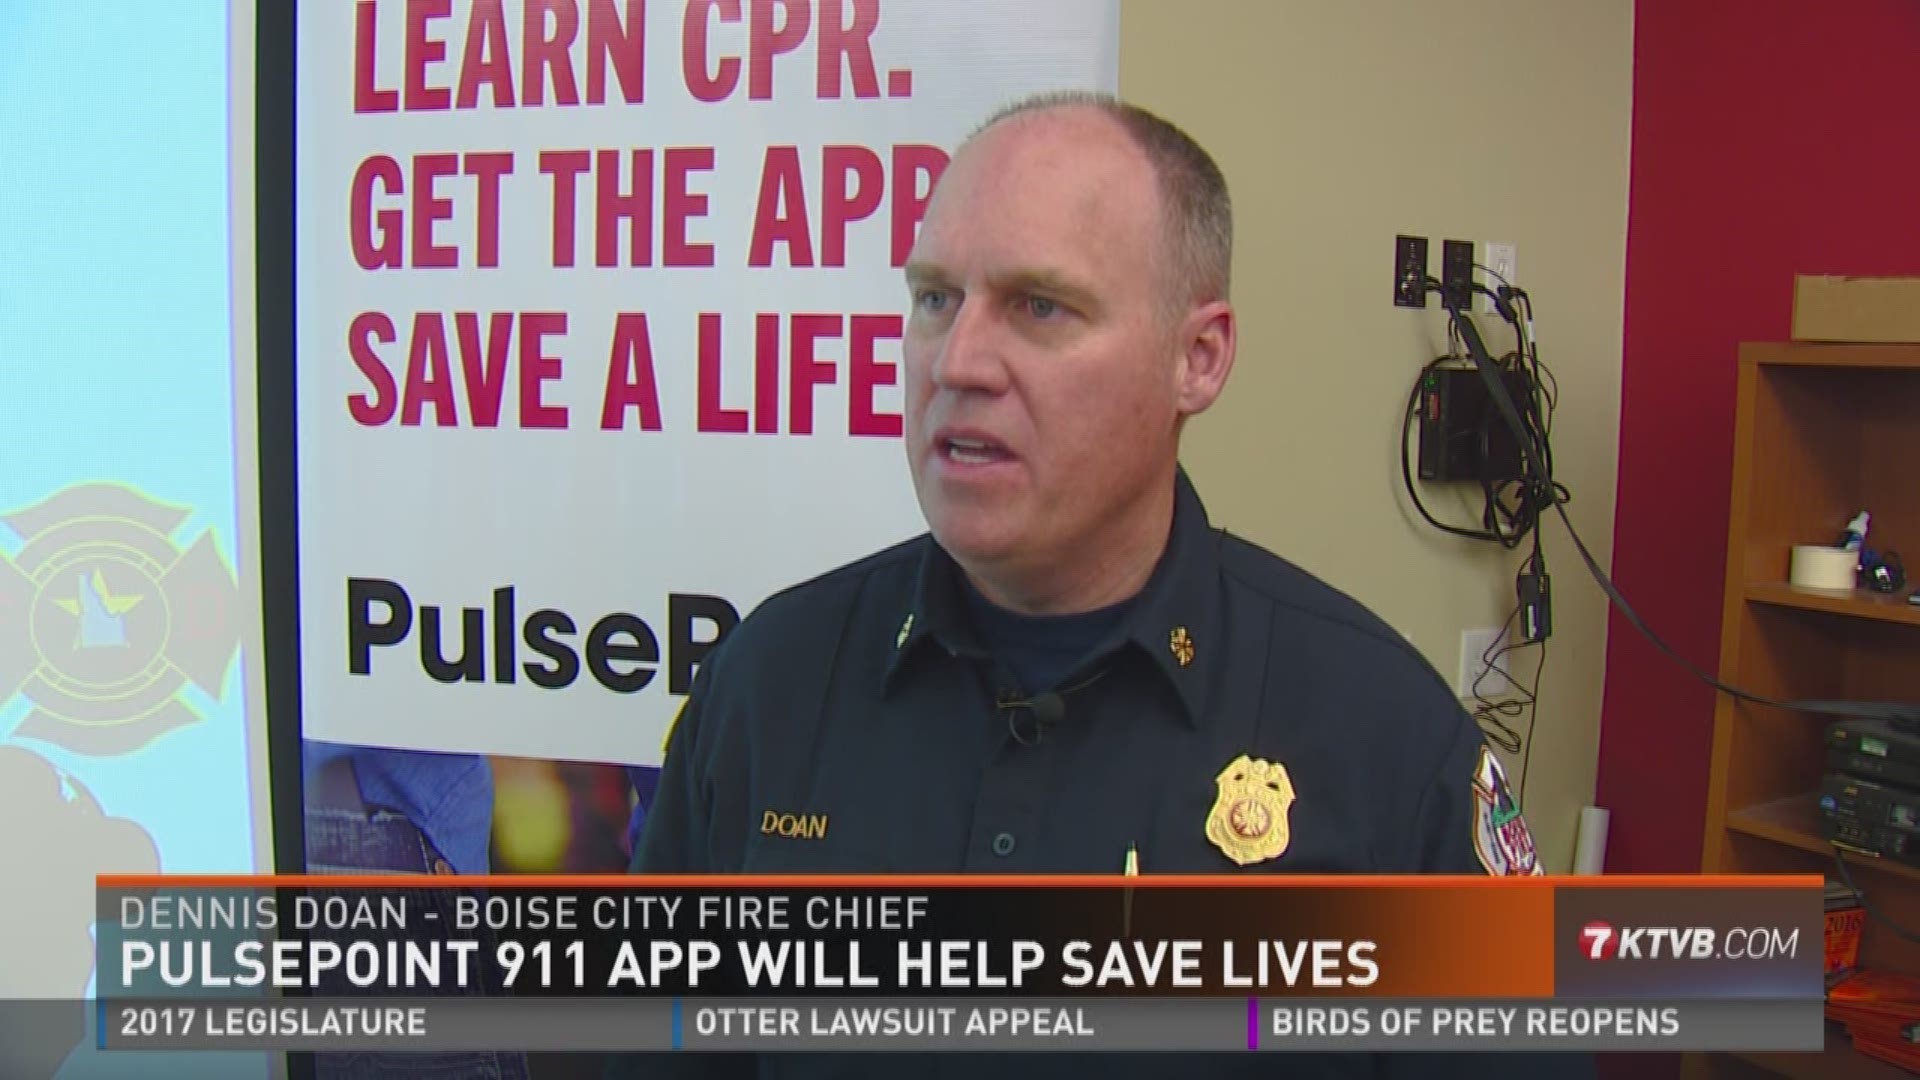 People who know CPR are encouraged to download the app.